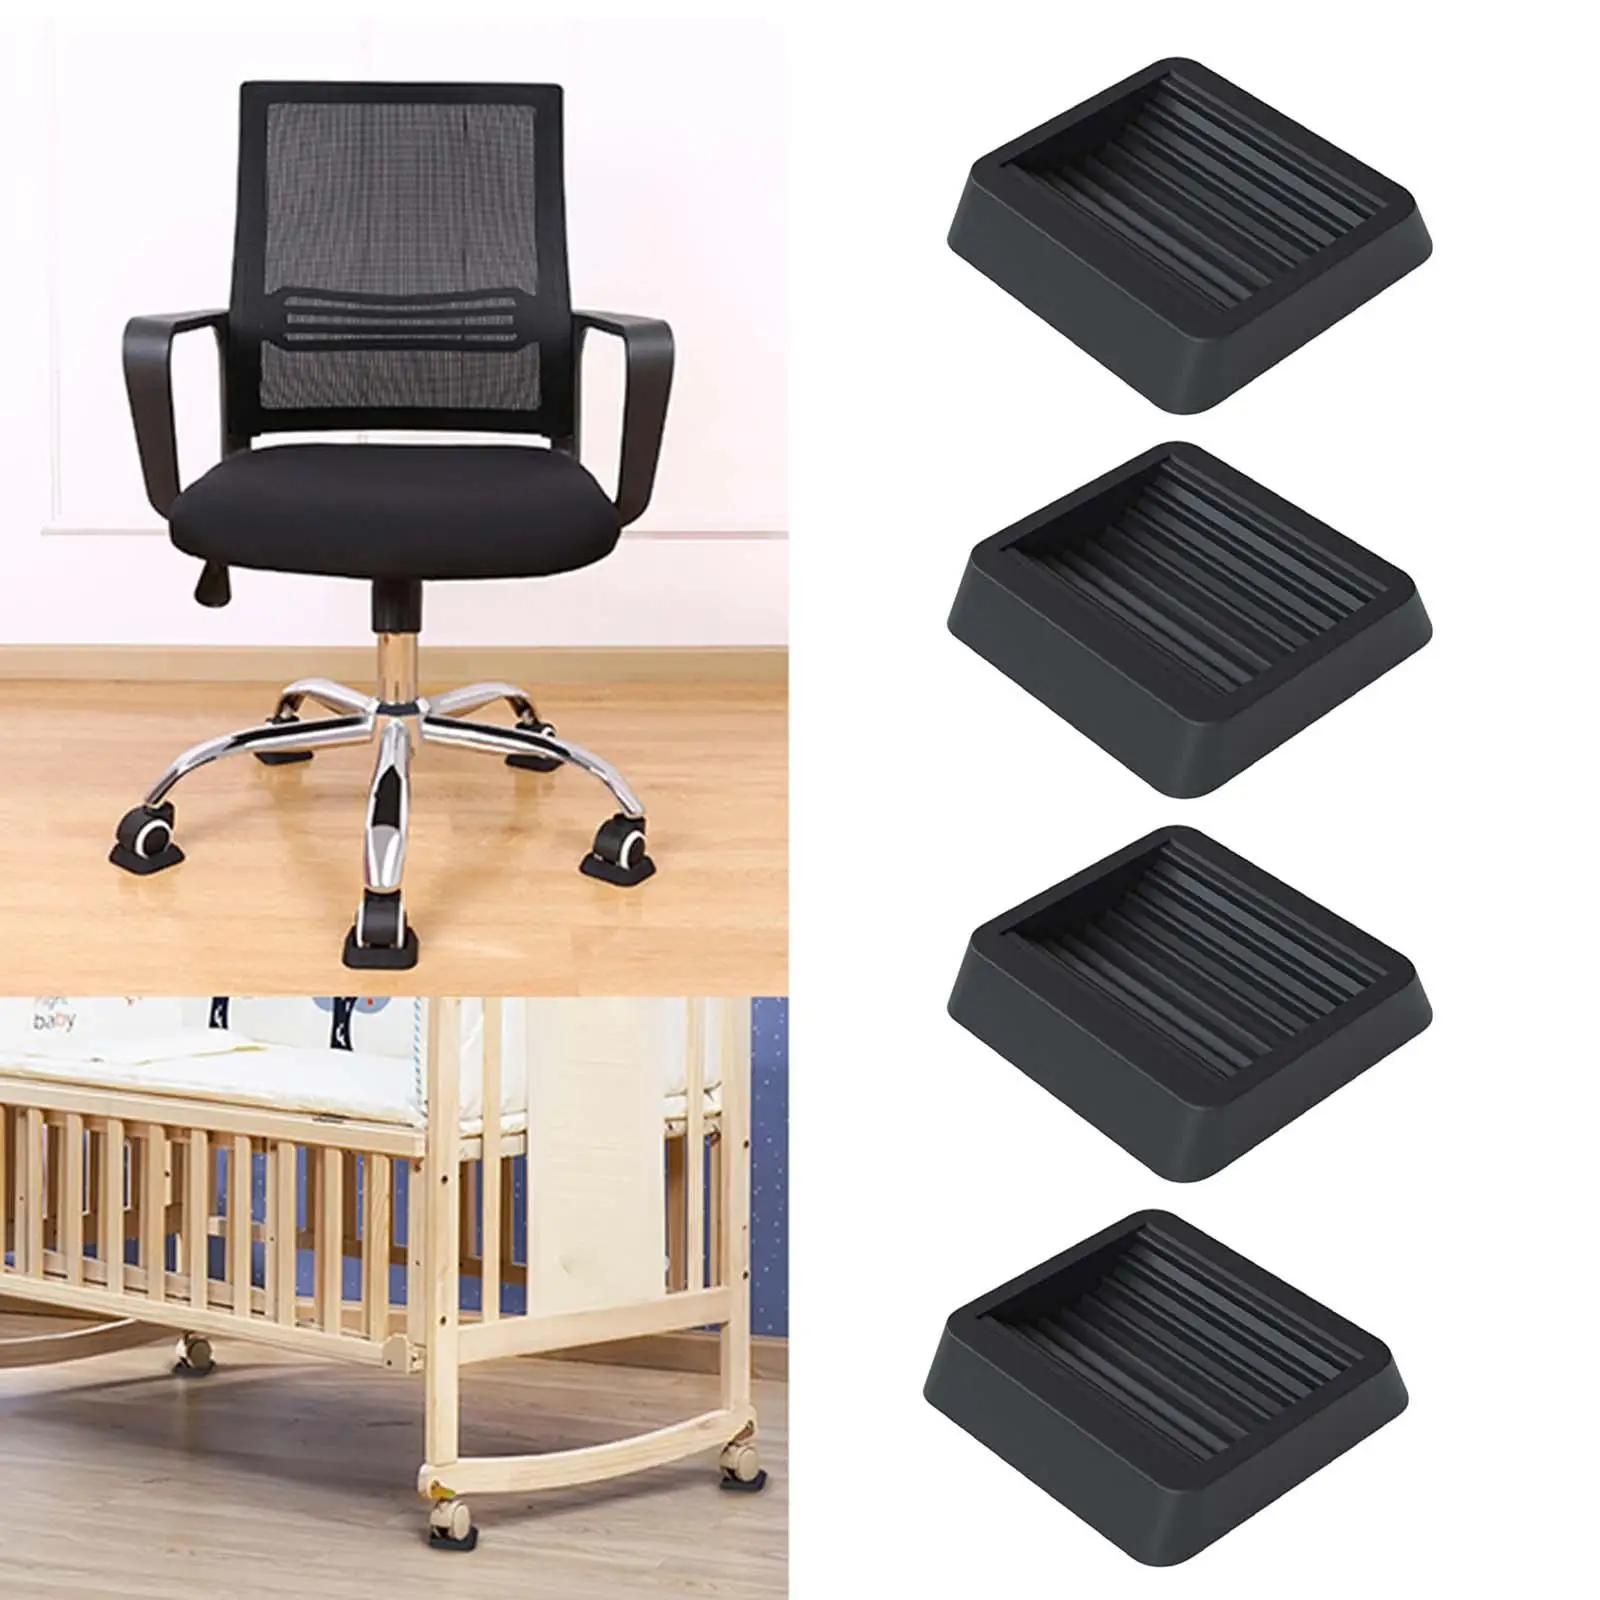 4Pcs Caster Cups Easy Use Chair Leg Floor Protectors Protector Pads Bed Frame Wheel Stoppers Hardwood Floor Protectors for Chair